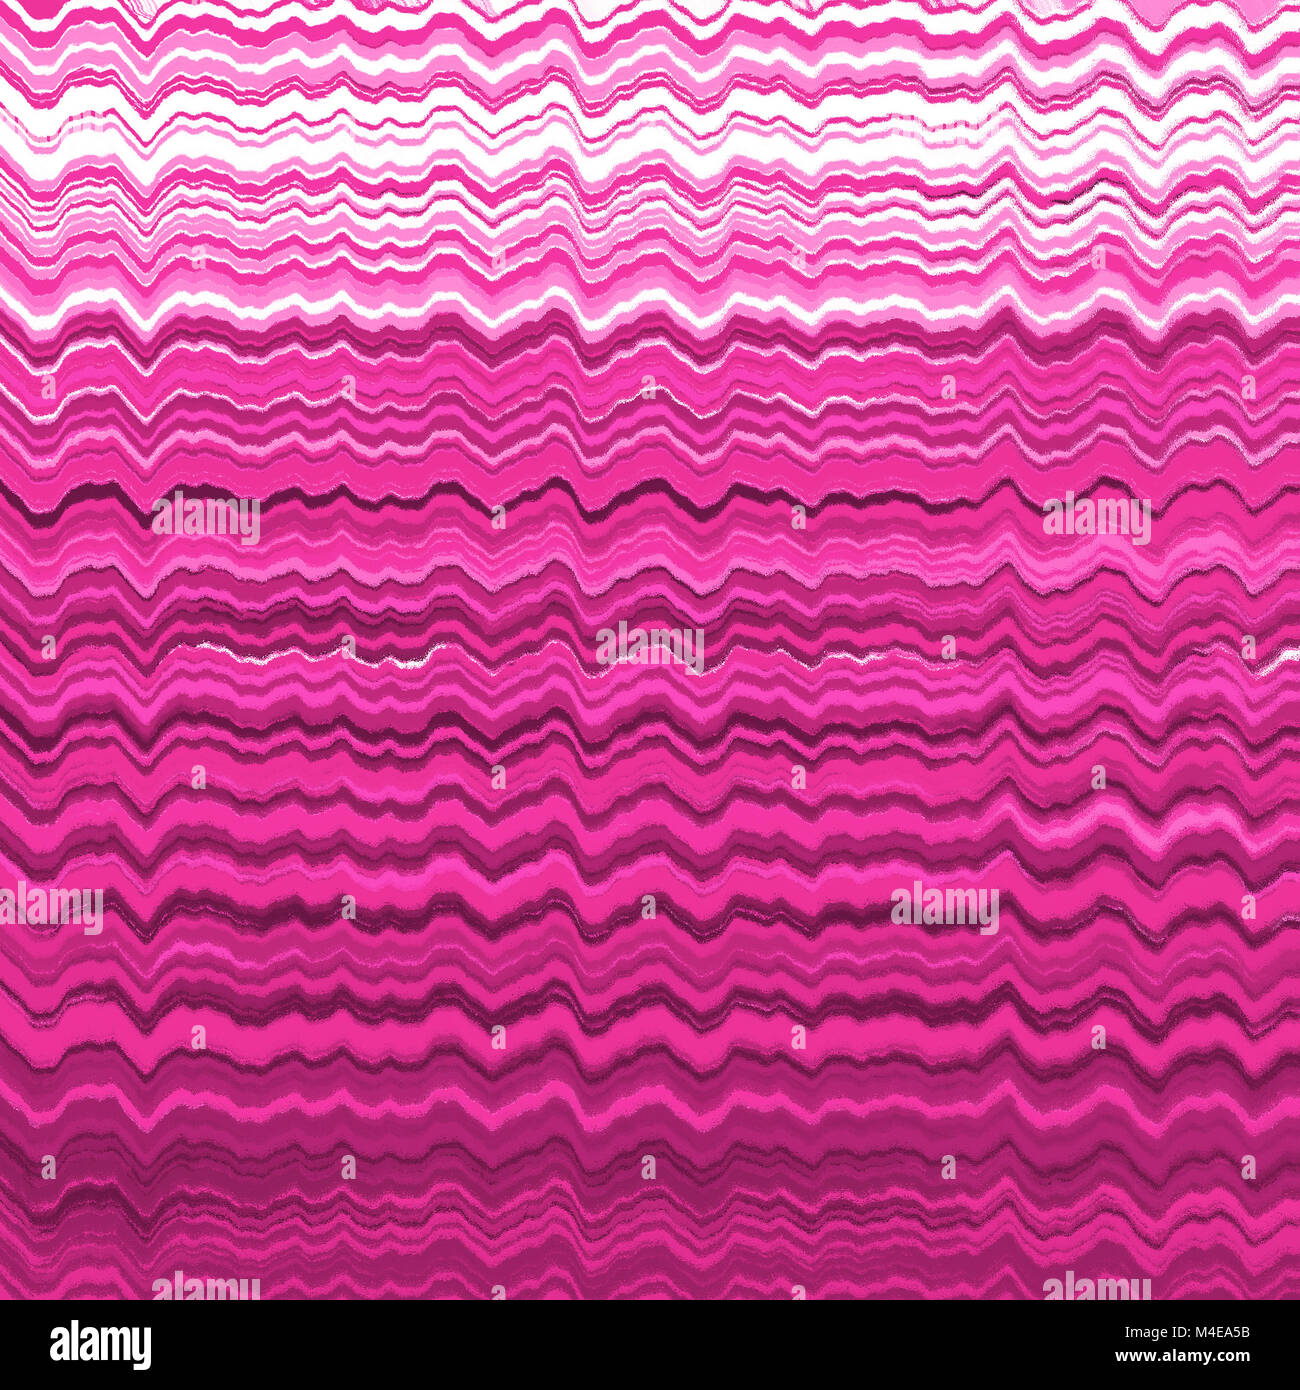 Pink distorted lines pattern Stock Photo